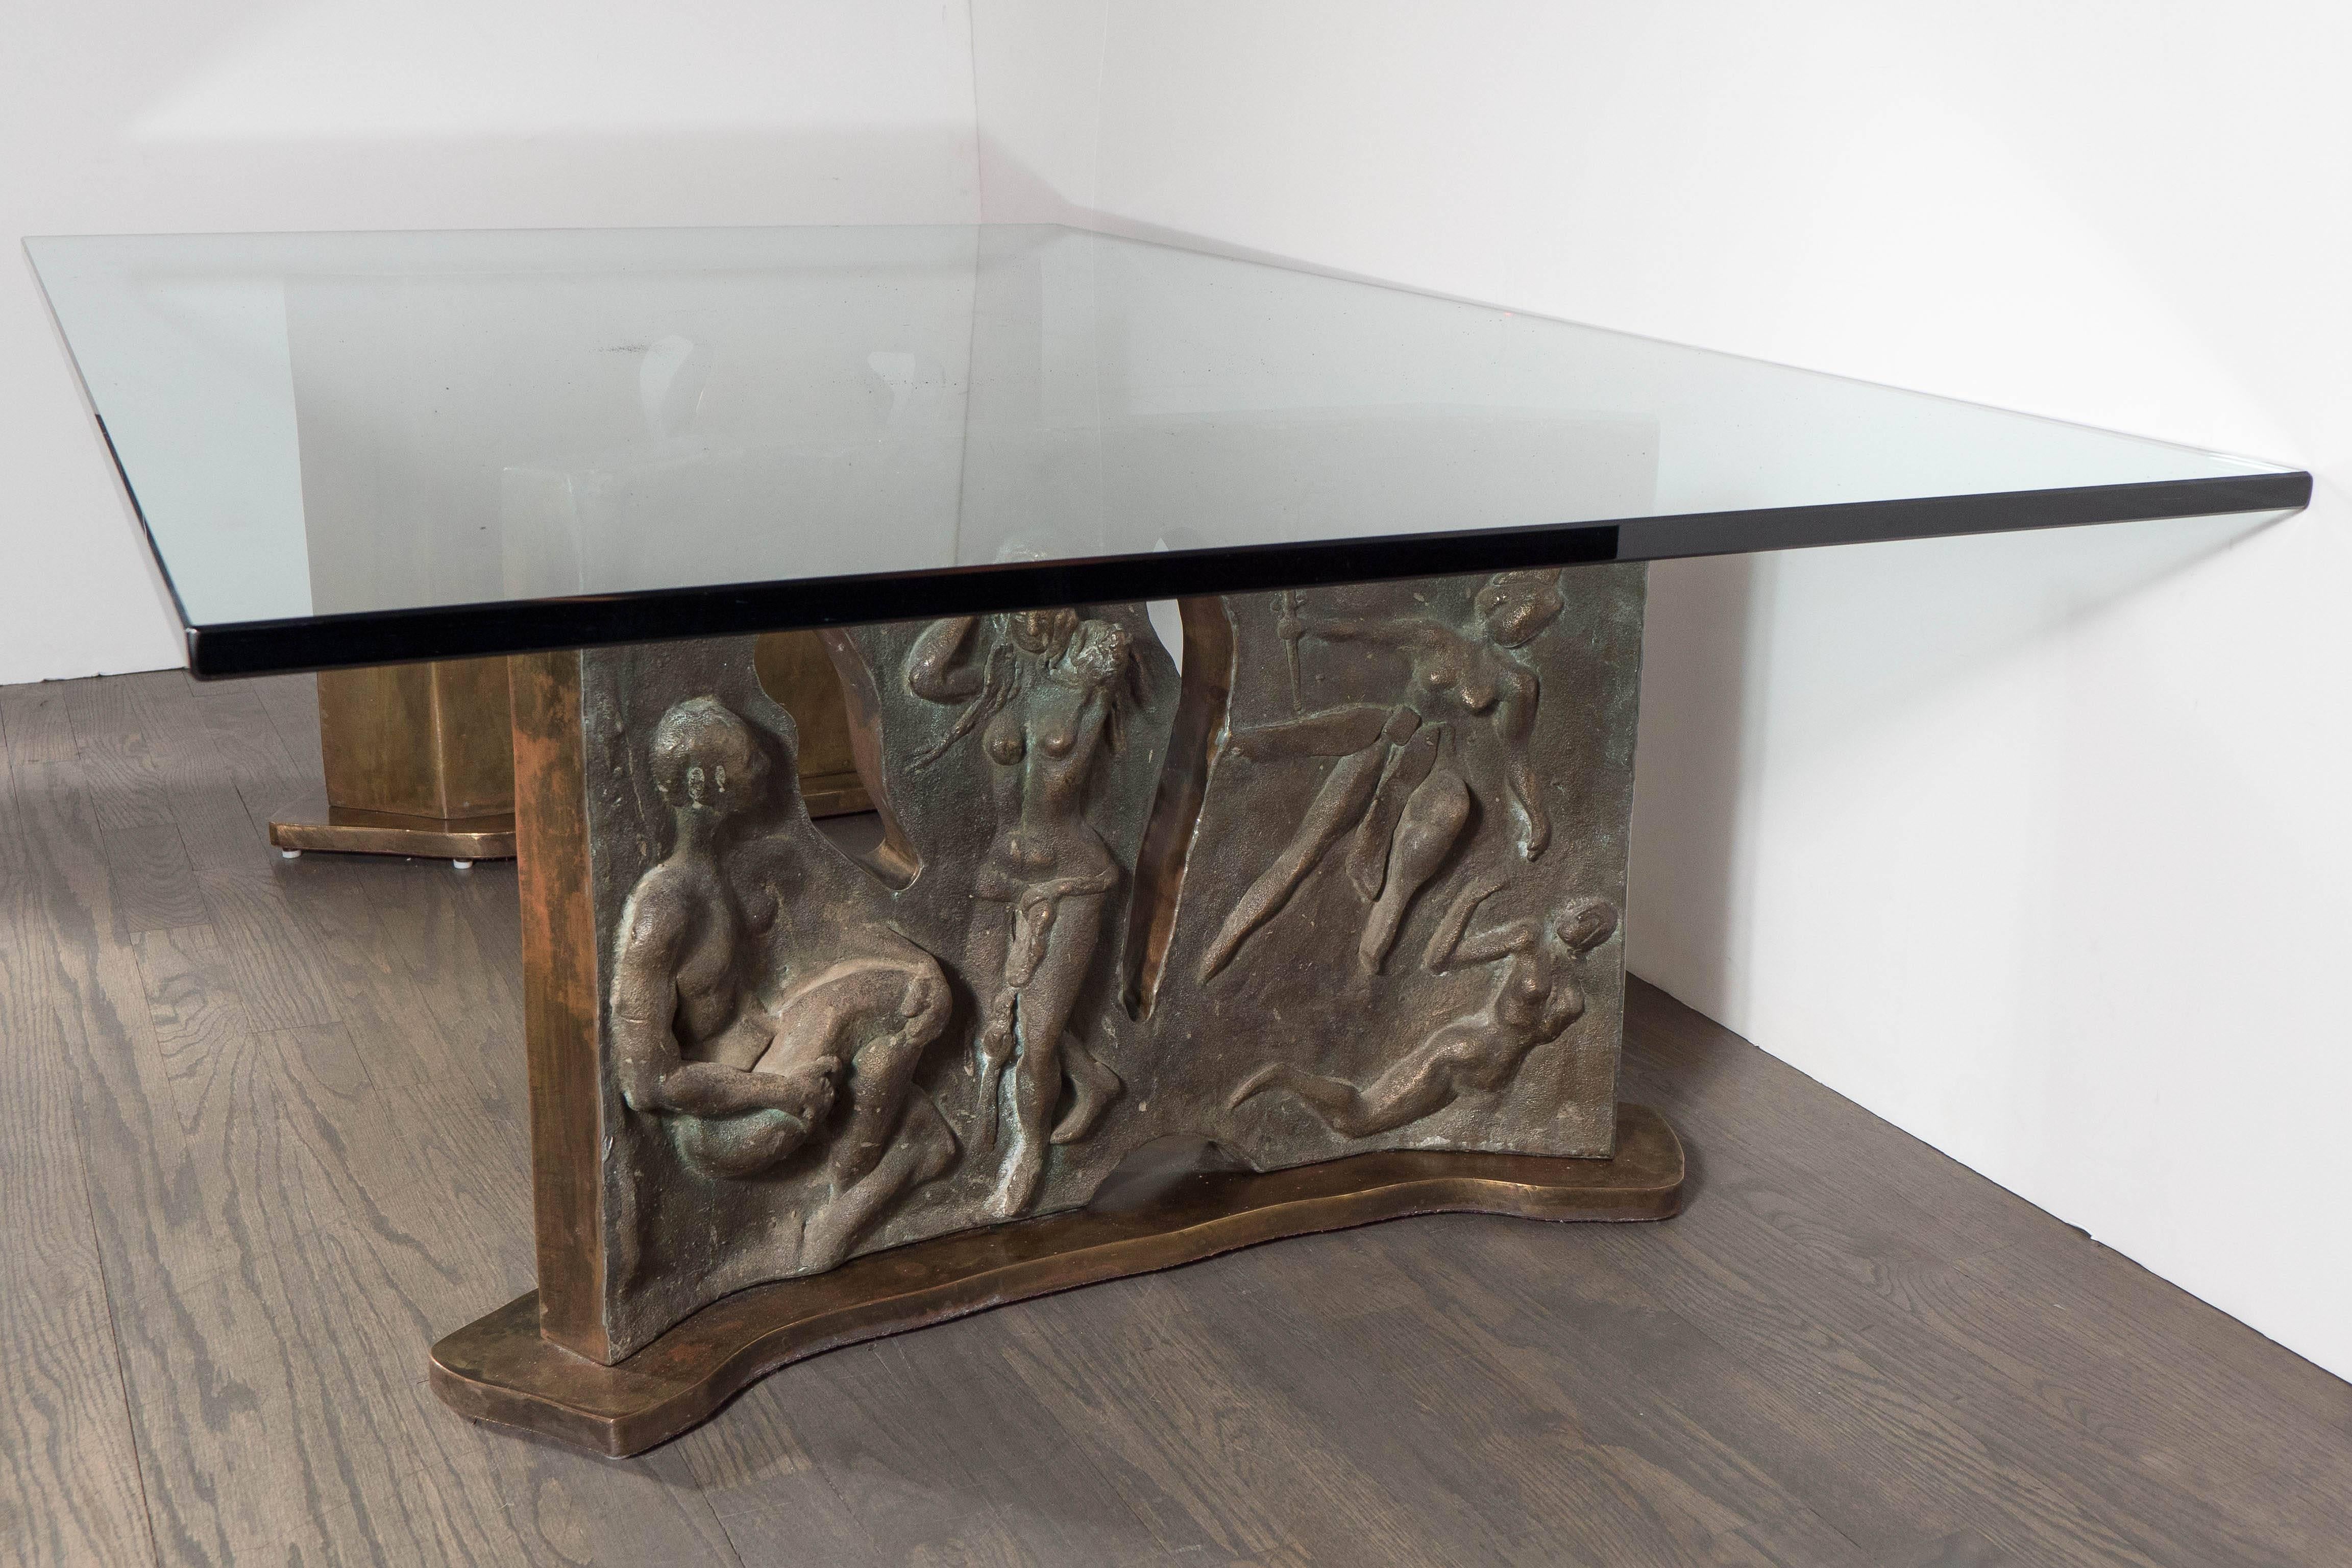 American Sculptural Figurative Bronze Cocktail Table, Signed Philip and Kelvin LaVerne